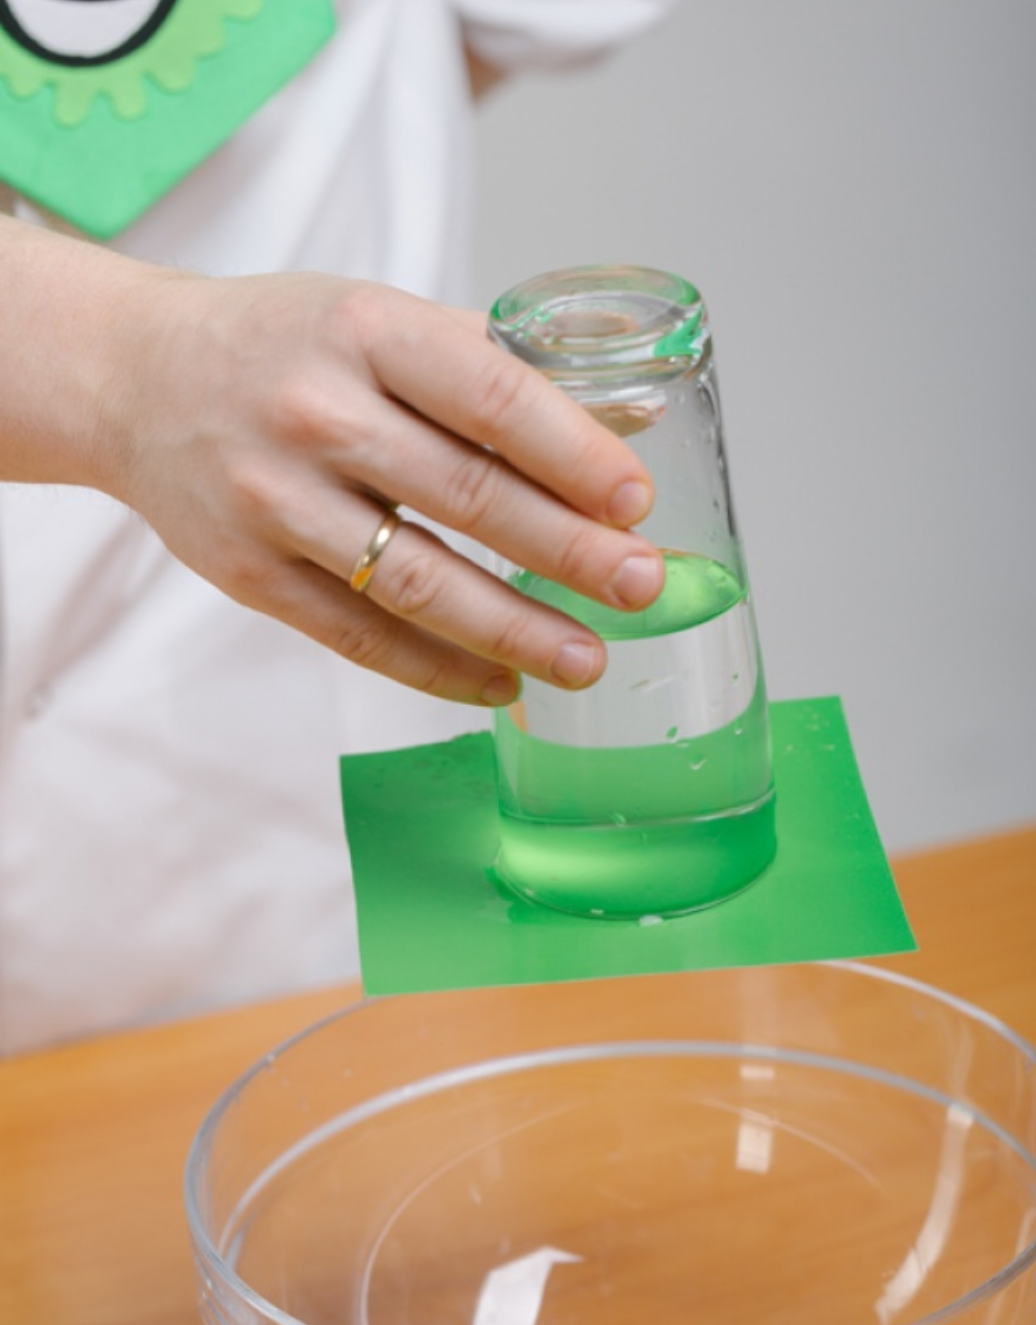 Eight easy science experiments that you can do with your kids - Child